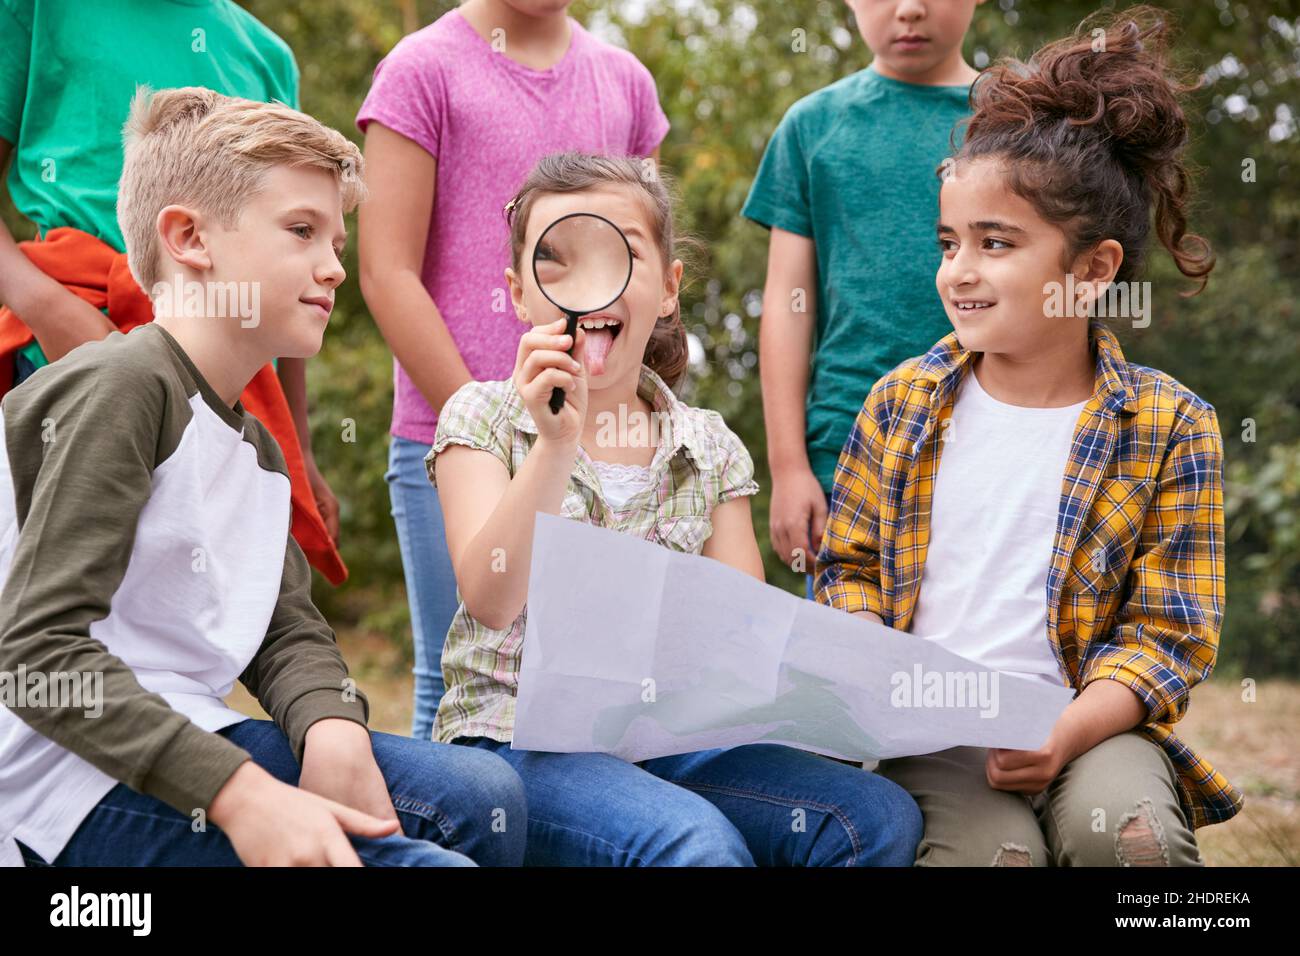 fun, magnifying glass, outdoor, funs, outdoors Stock Photo